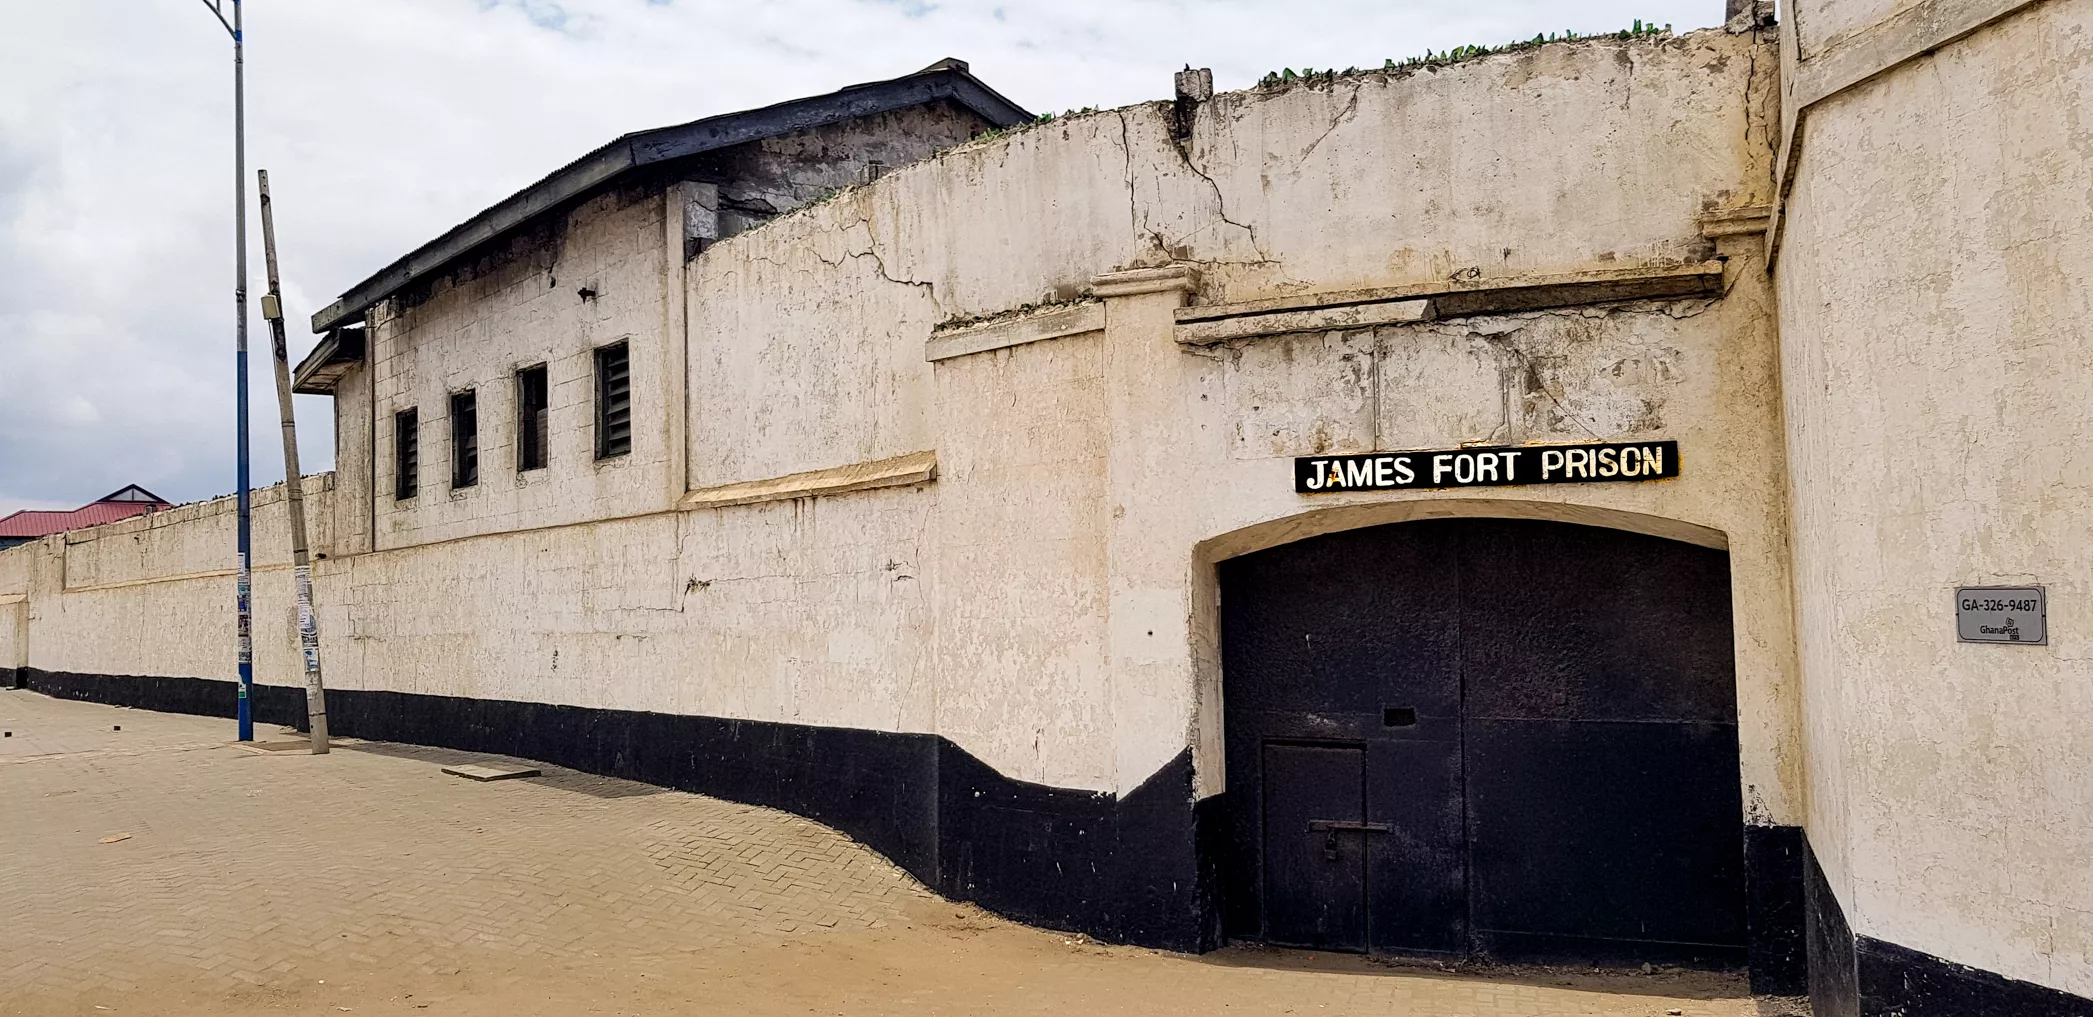 Ussher Fort in Ghana, Africa | Museums,Architecture - Rated 3.2